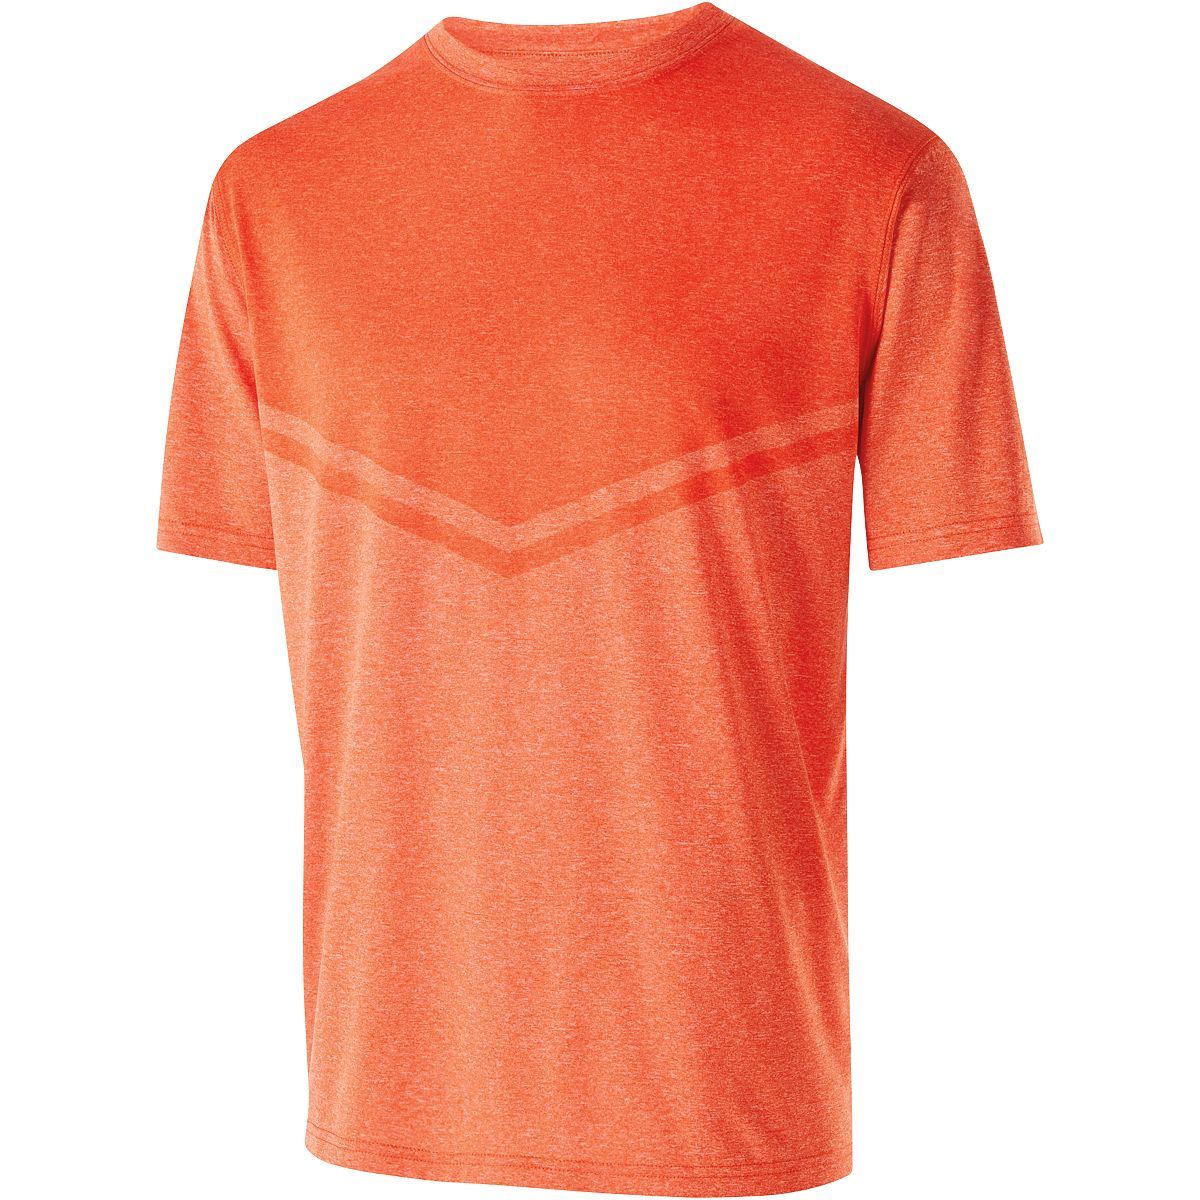 Holloway Seismic Tee in Orange Heather  -Part of the Adult, Adult-Tee-Shirt, T-Shirts, Holloway, Shirts product lines at KanaleyCreations.com